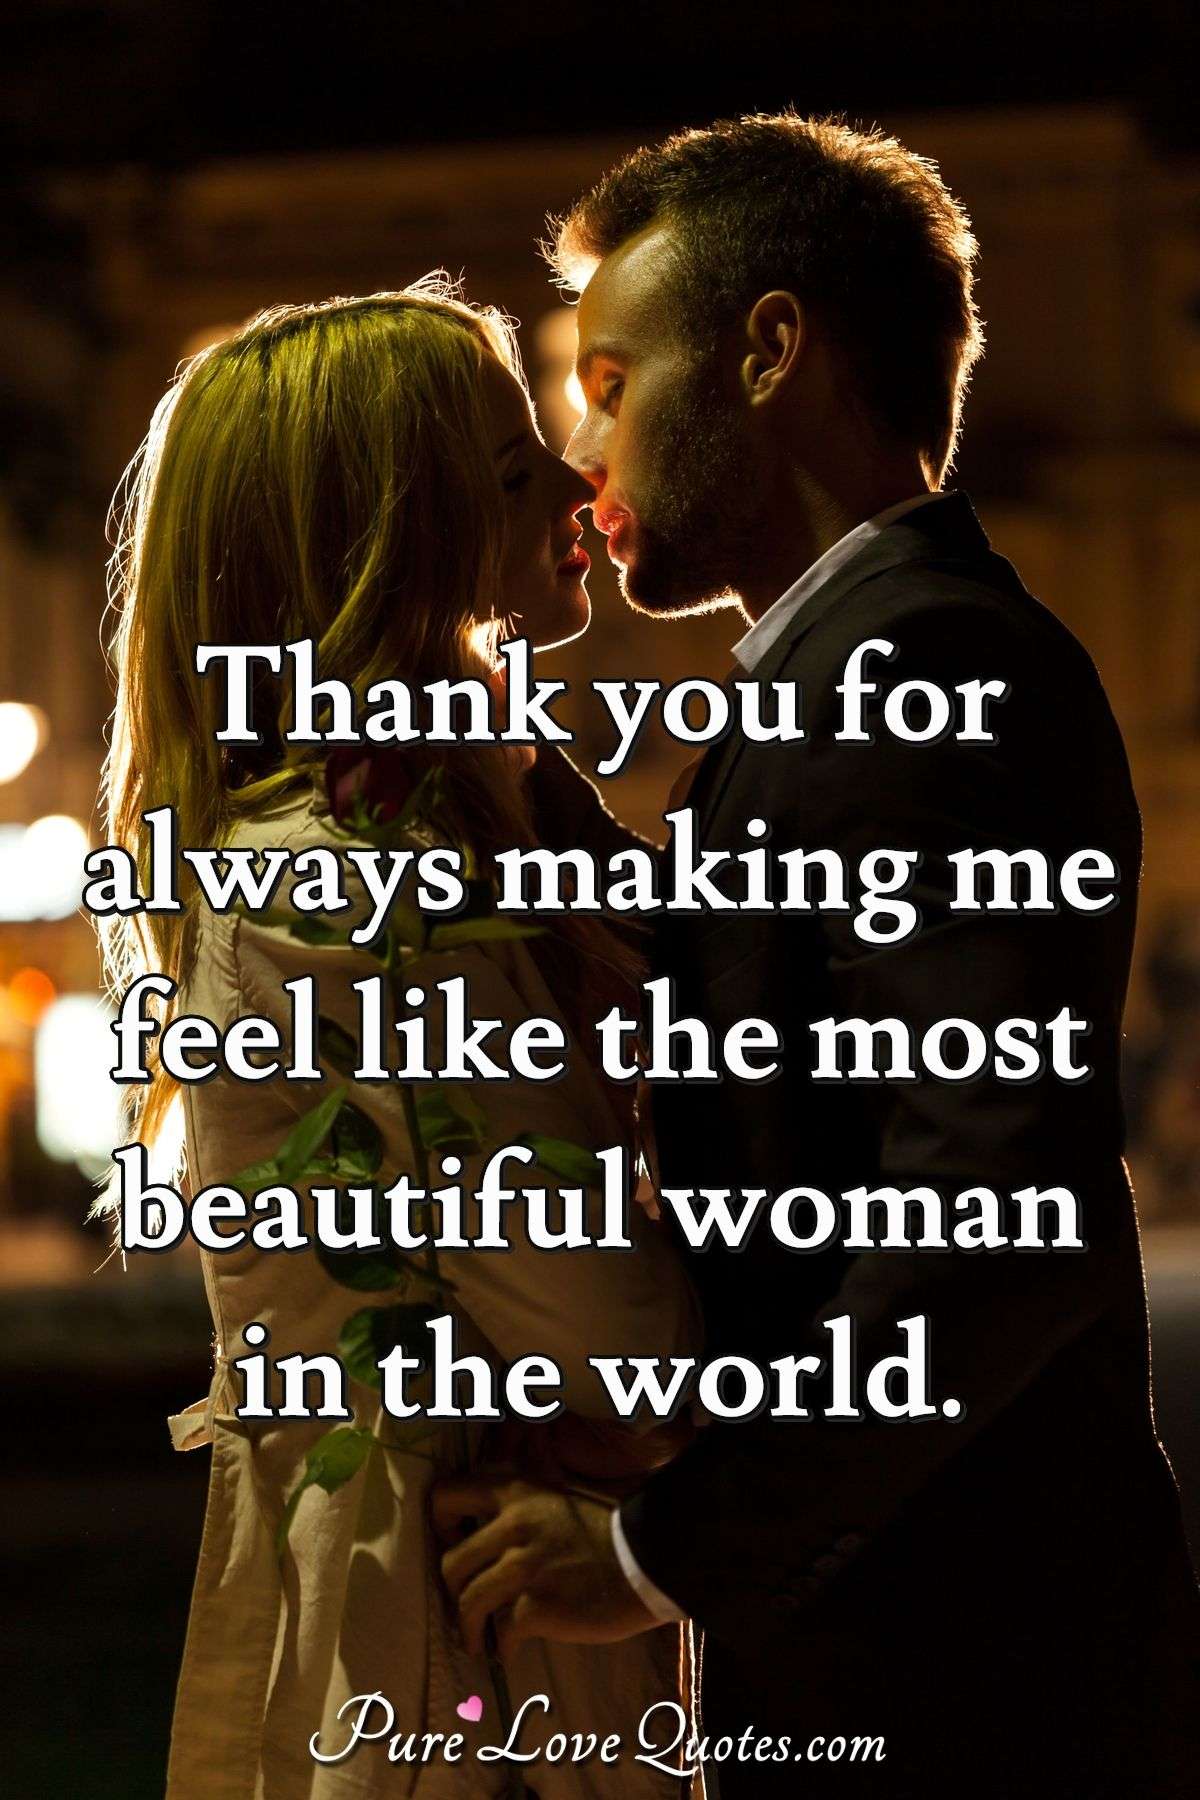 Thank you for always making me feel like the most beautiful woman in the world. - Anonymous